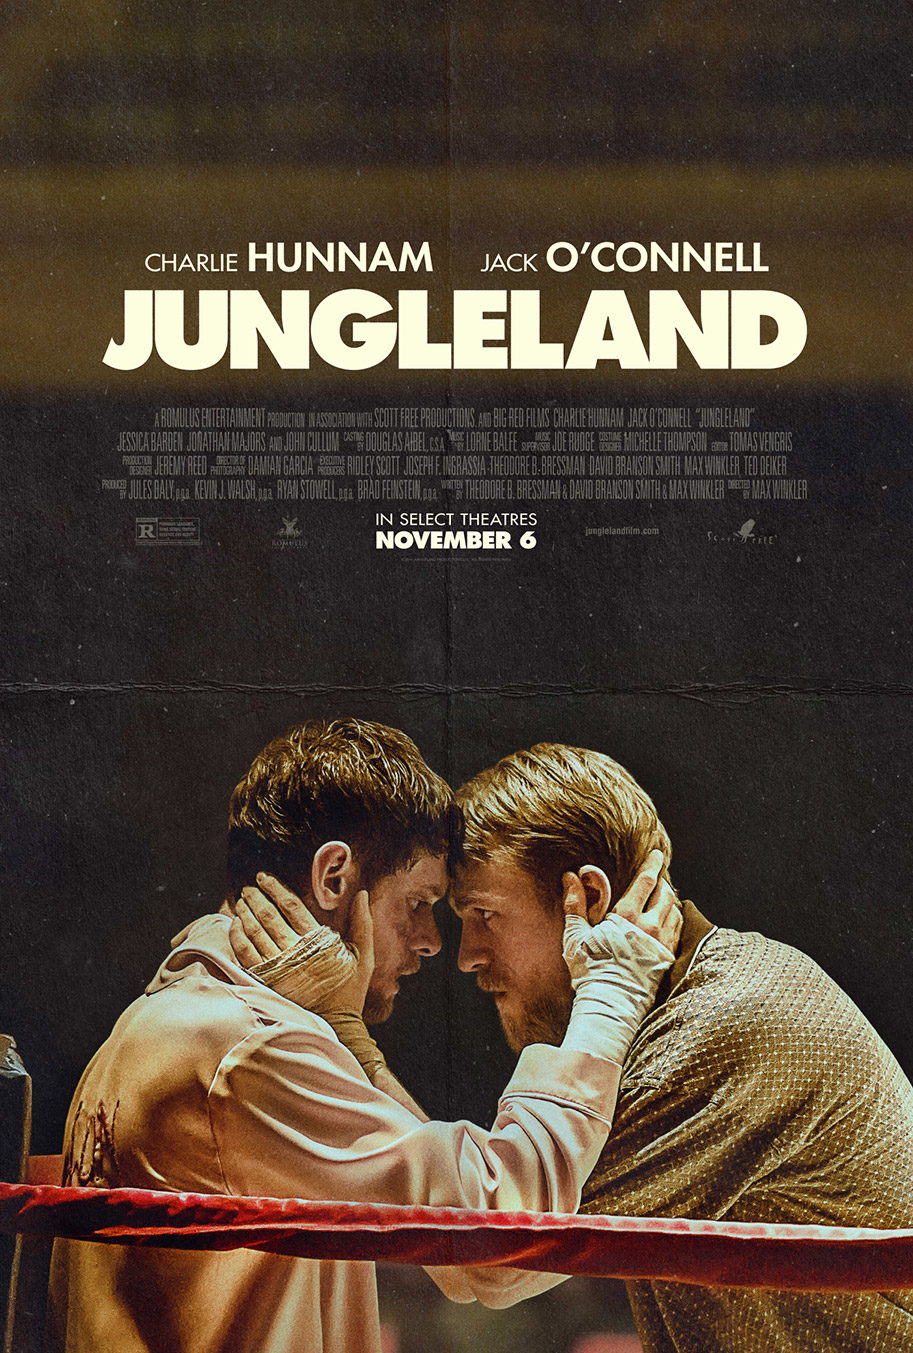 Jungleland, Charlie Hunnam, Paramount Pictures